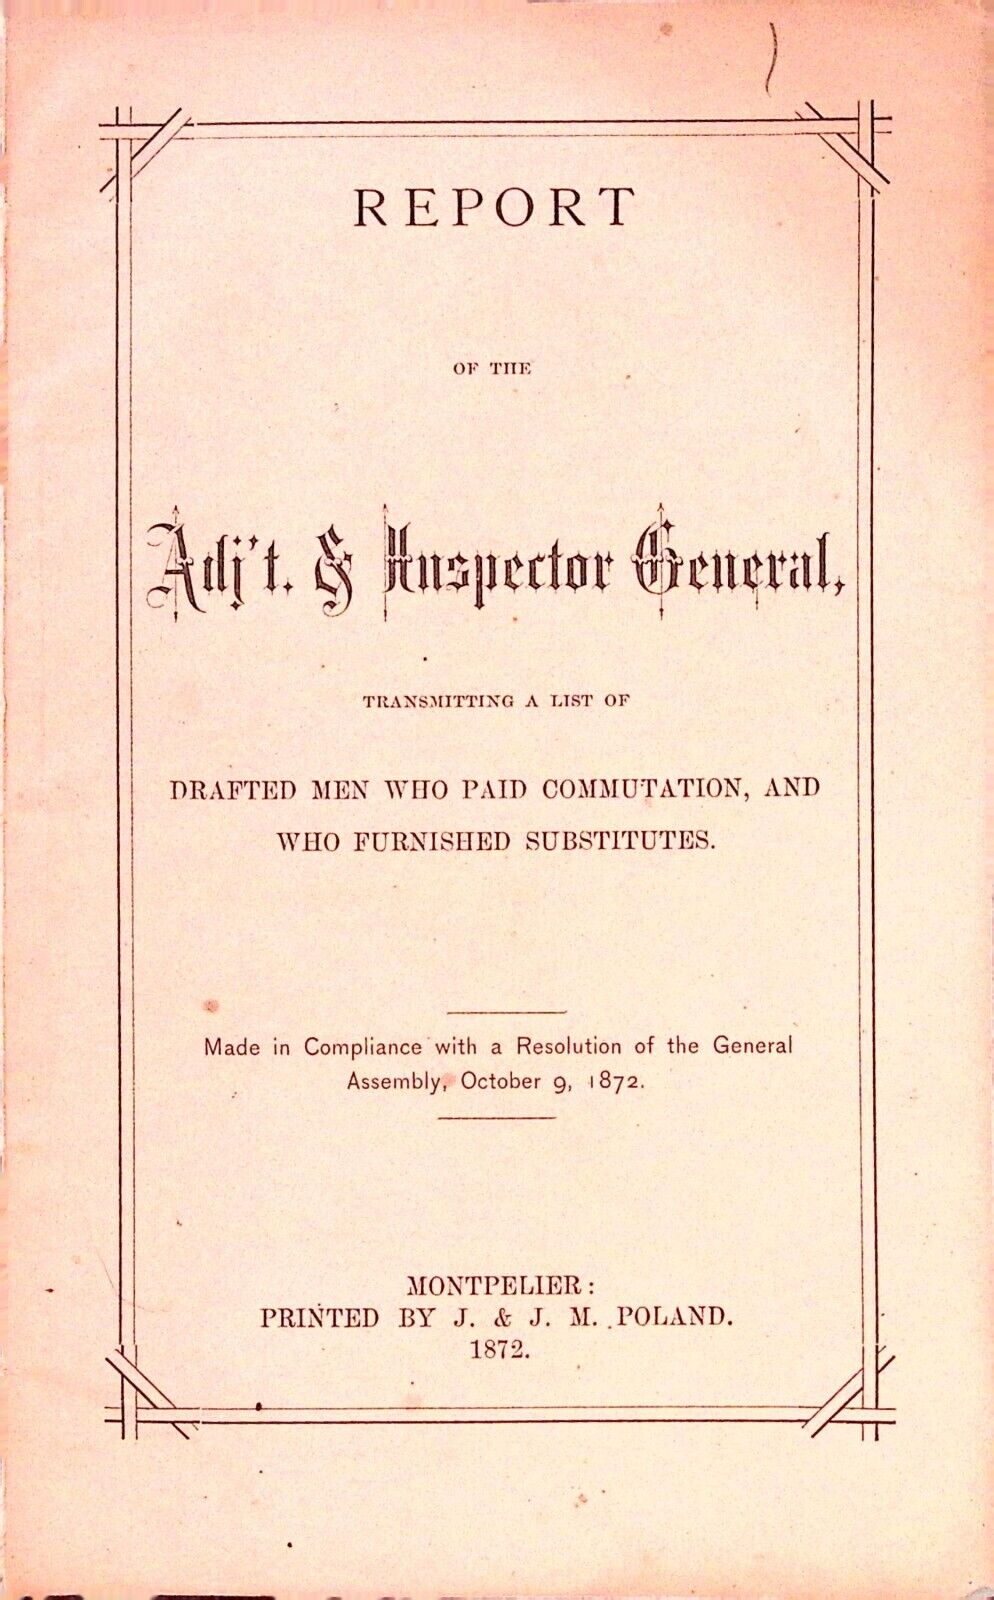 Vermont Inspector General 1872 Military Draft Report Paid Commutation Substitute